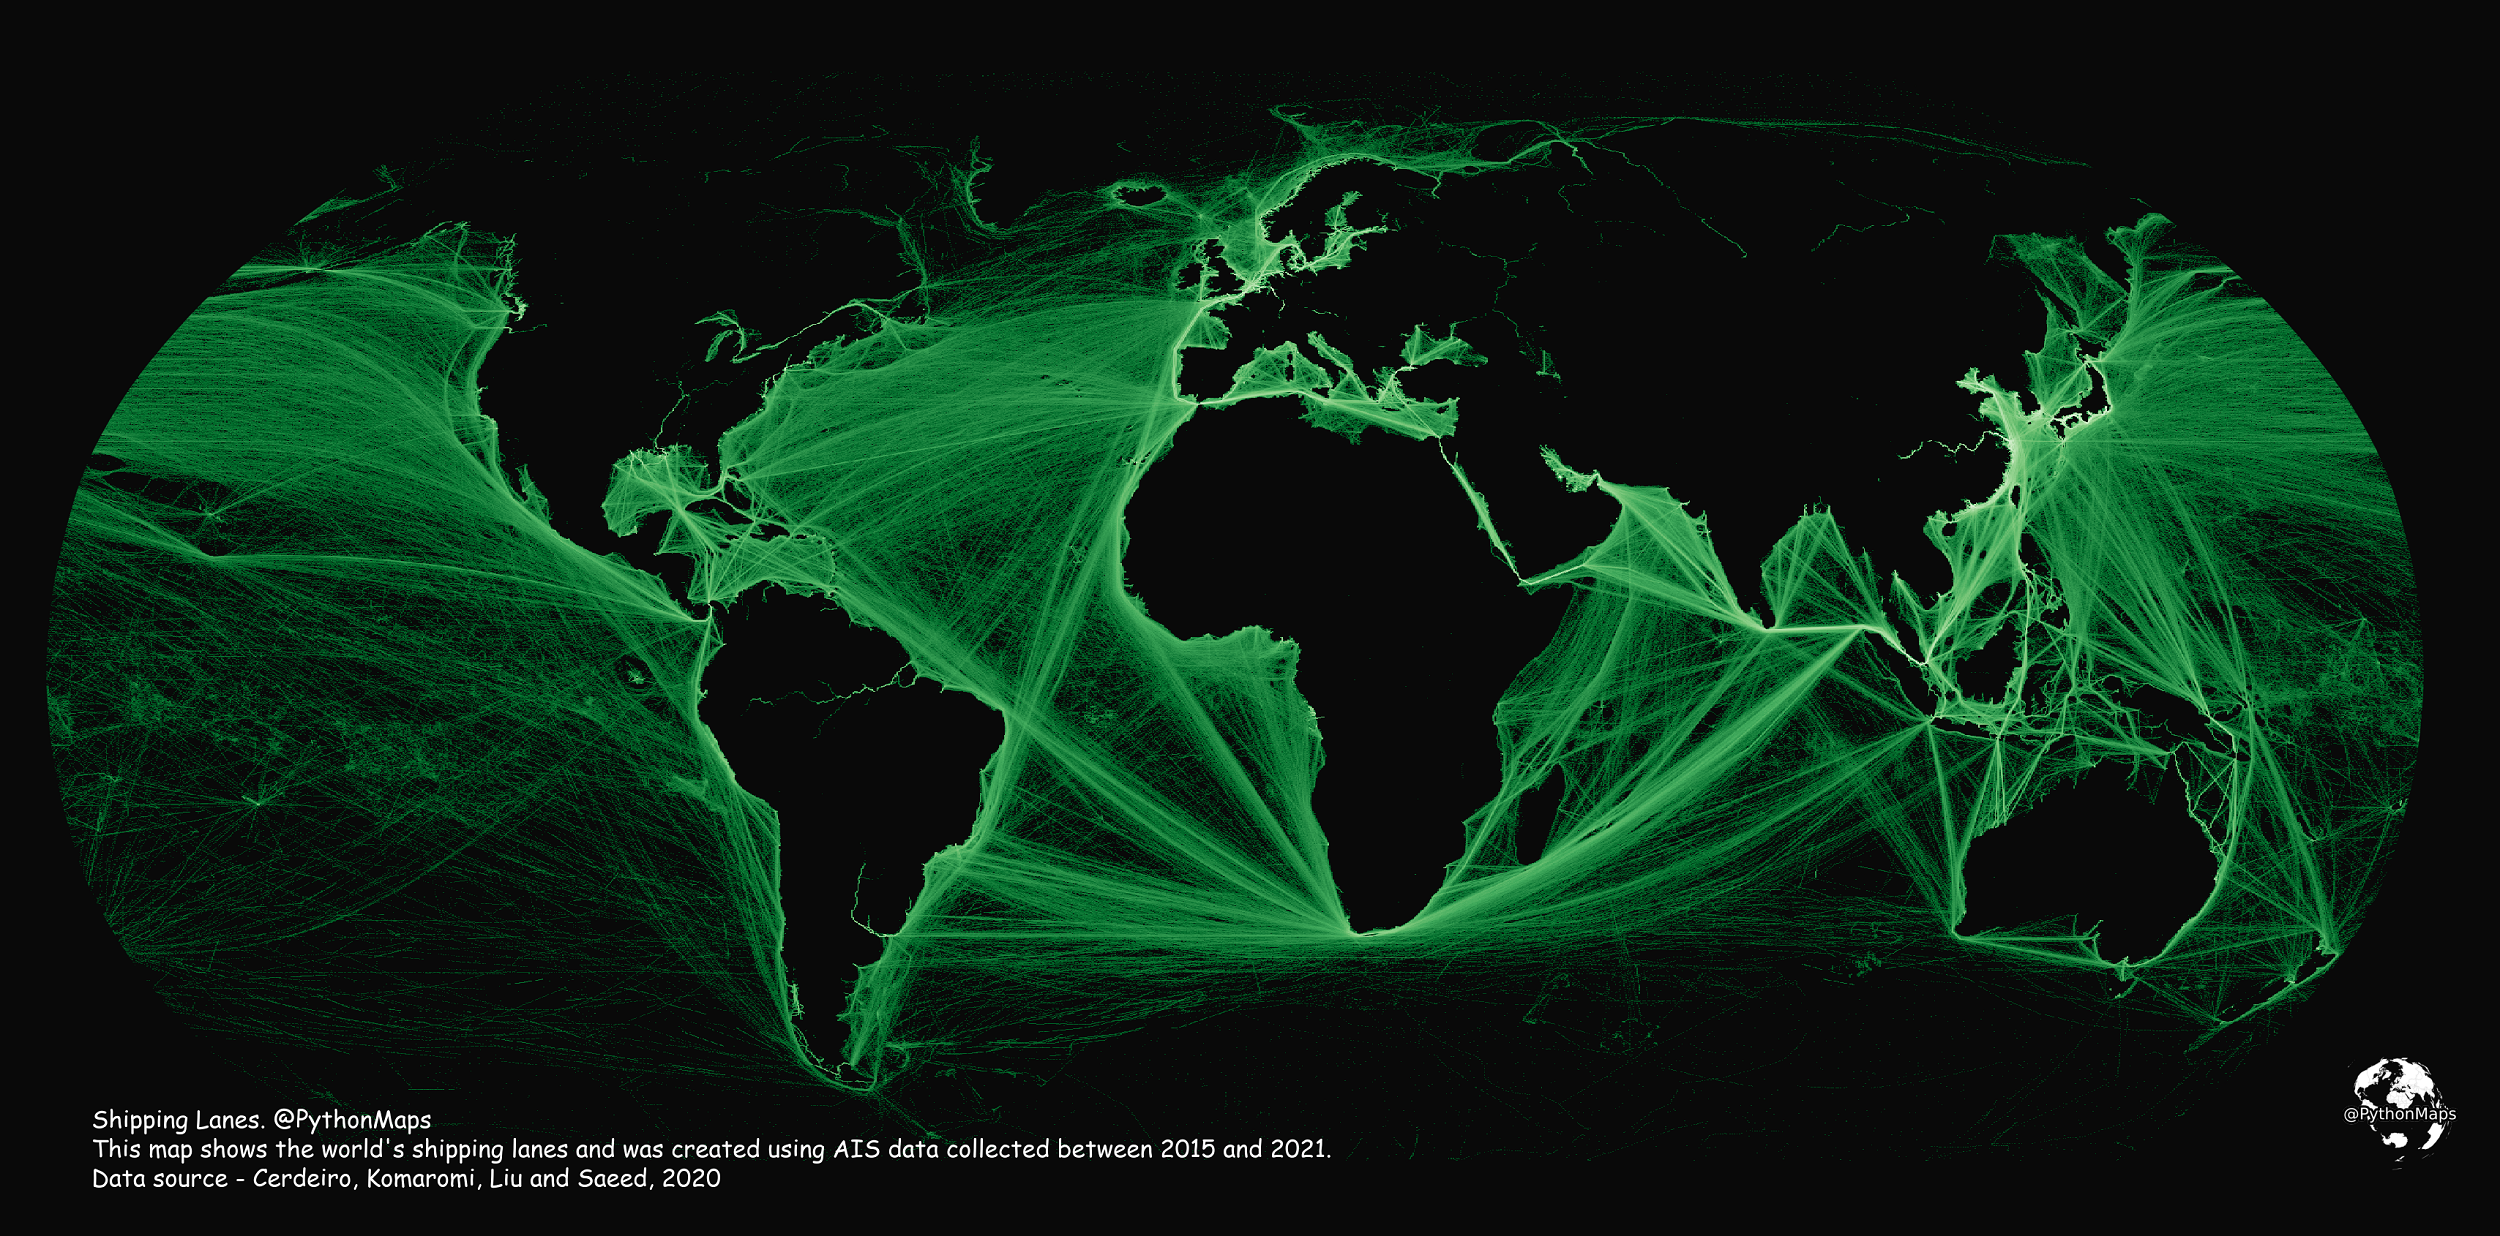 this map visualizes maritime traffic around the world and highlights the world's shipping lanes.